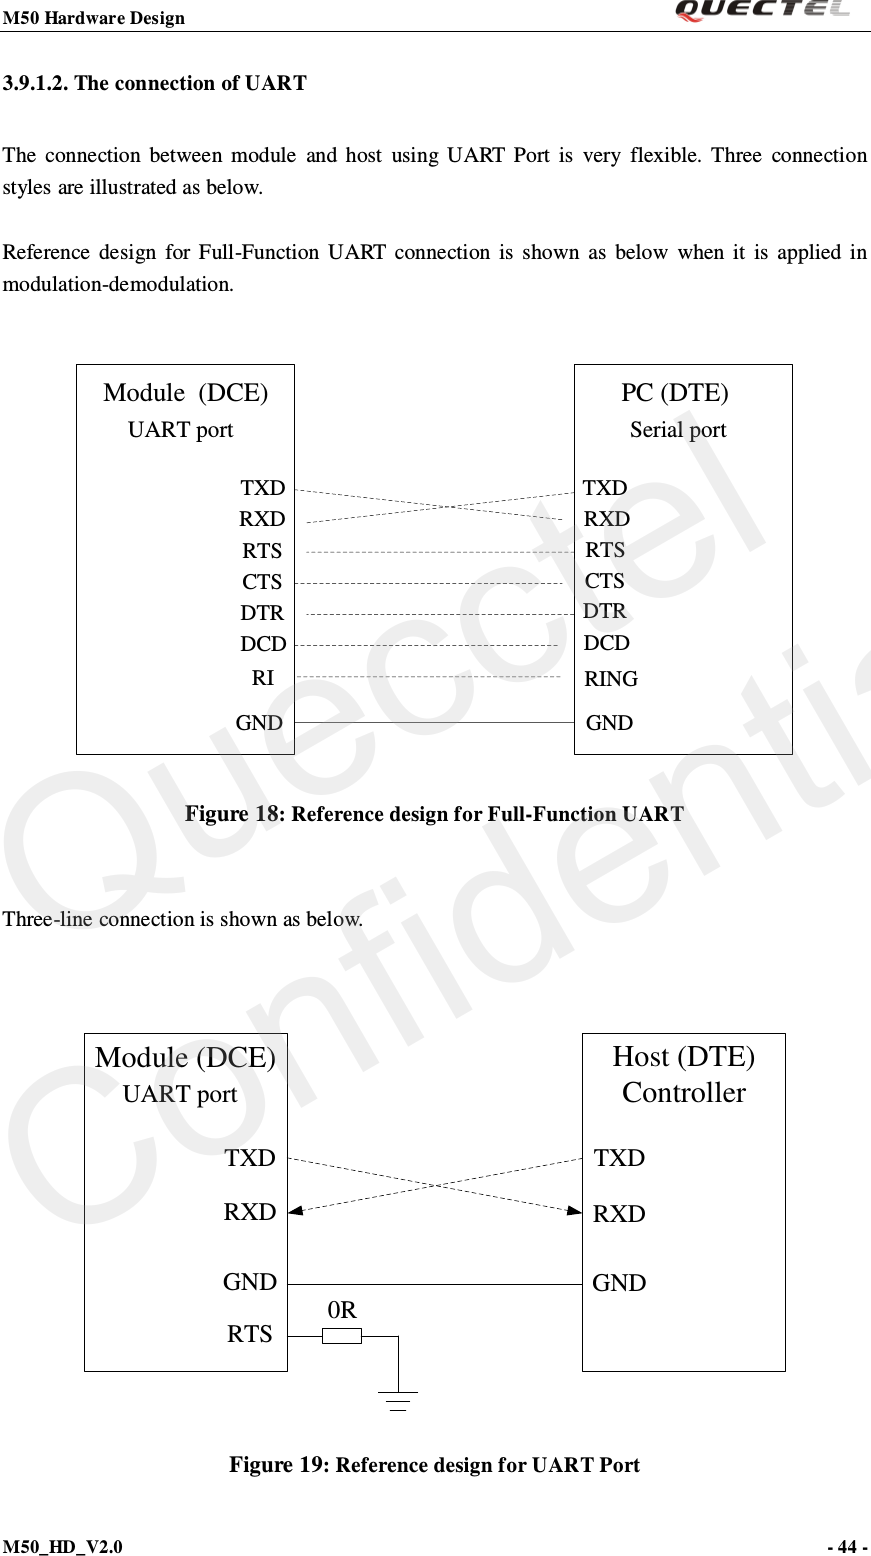 M50 Hardware Design                                                                M50_HD_V2.0                                                                      - 44 -   3.9.1.2. The connection of UART The connection between module and host using UART Port is very flexible. Three connection styles are illustrated as below.    Reference design for Full-Function  U A RT connection is shown as below when it is applied in modulation-demodulation.  TXDRXDRTSCTSDTRDCDRITXDRXDRTSCTSDTRDCDRINGModule  (DCE)Serial portUART portGND GNDPC (DTE) Figure 18: Reference design for Full-Function UART  Three-line connection is shown as below.  TXDRXDGNDUART portRTS0RTXDRXDGNDModule (DCE) Host (DTE)Controller Figure 19: Reference design for UART Port Quecctel Confidential